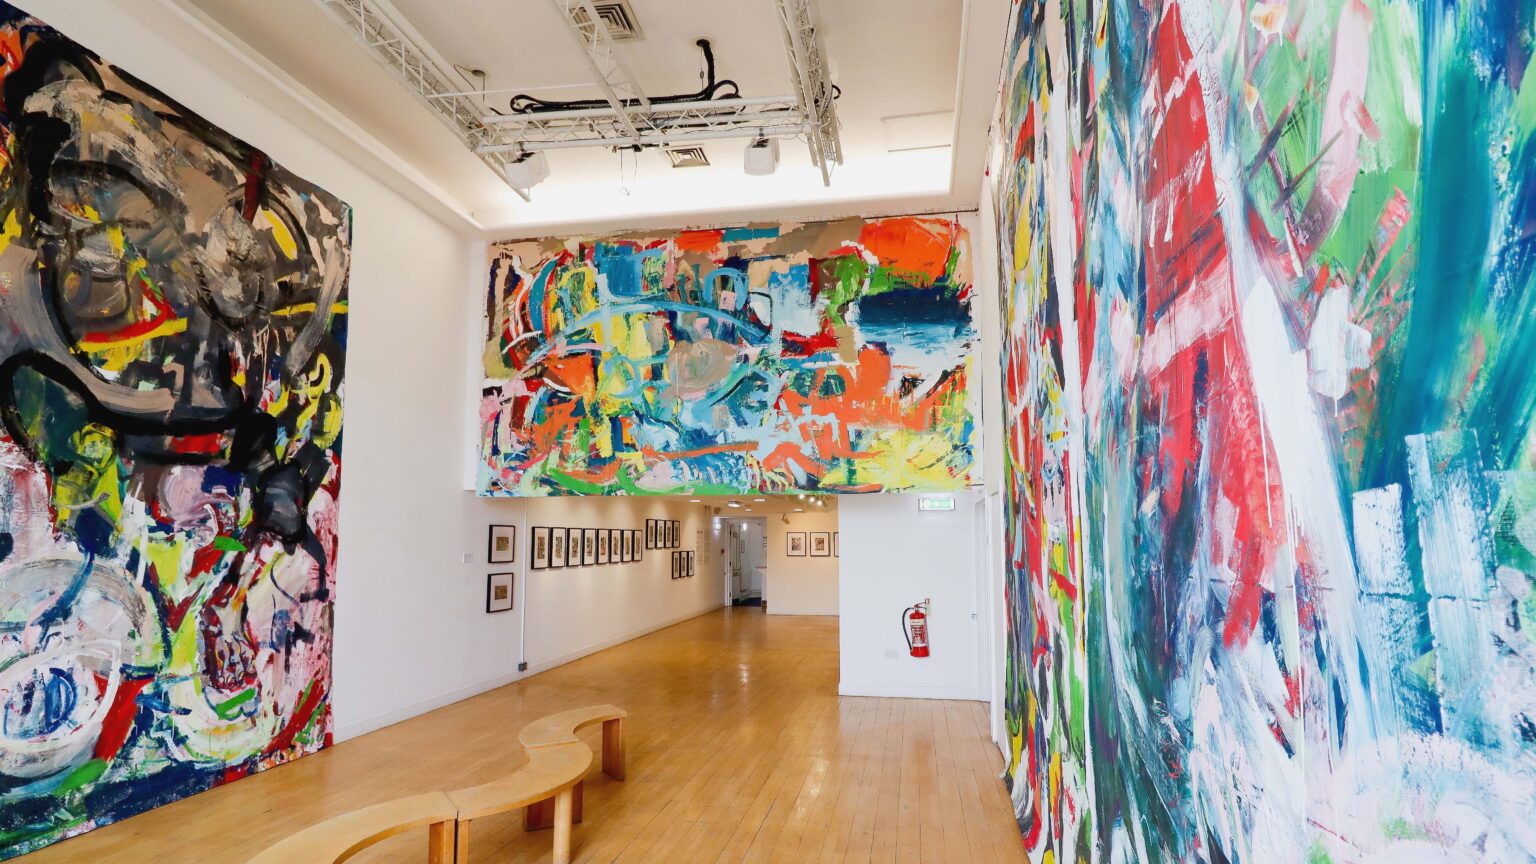 A large, high ceilinged gallery space with a polished pine floor. Large colourful abstract paintings cover most of the wall space. In one section of the gallery are hung small framed photographs.